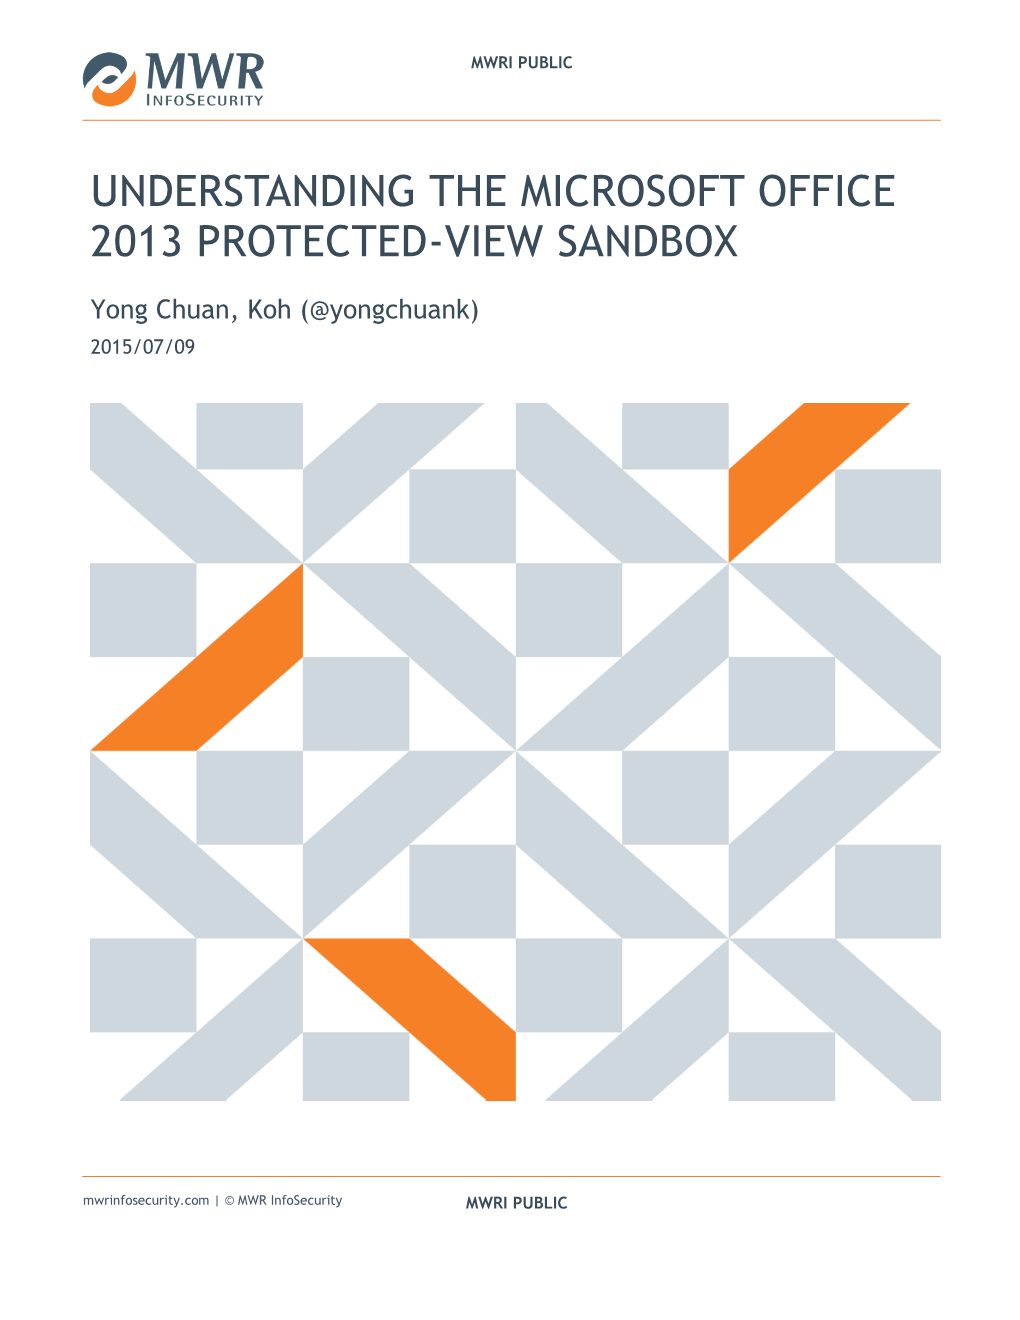 Understanding the Microsoft Office 2013 Protected-View Sandbox